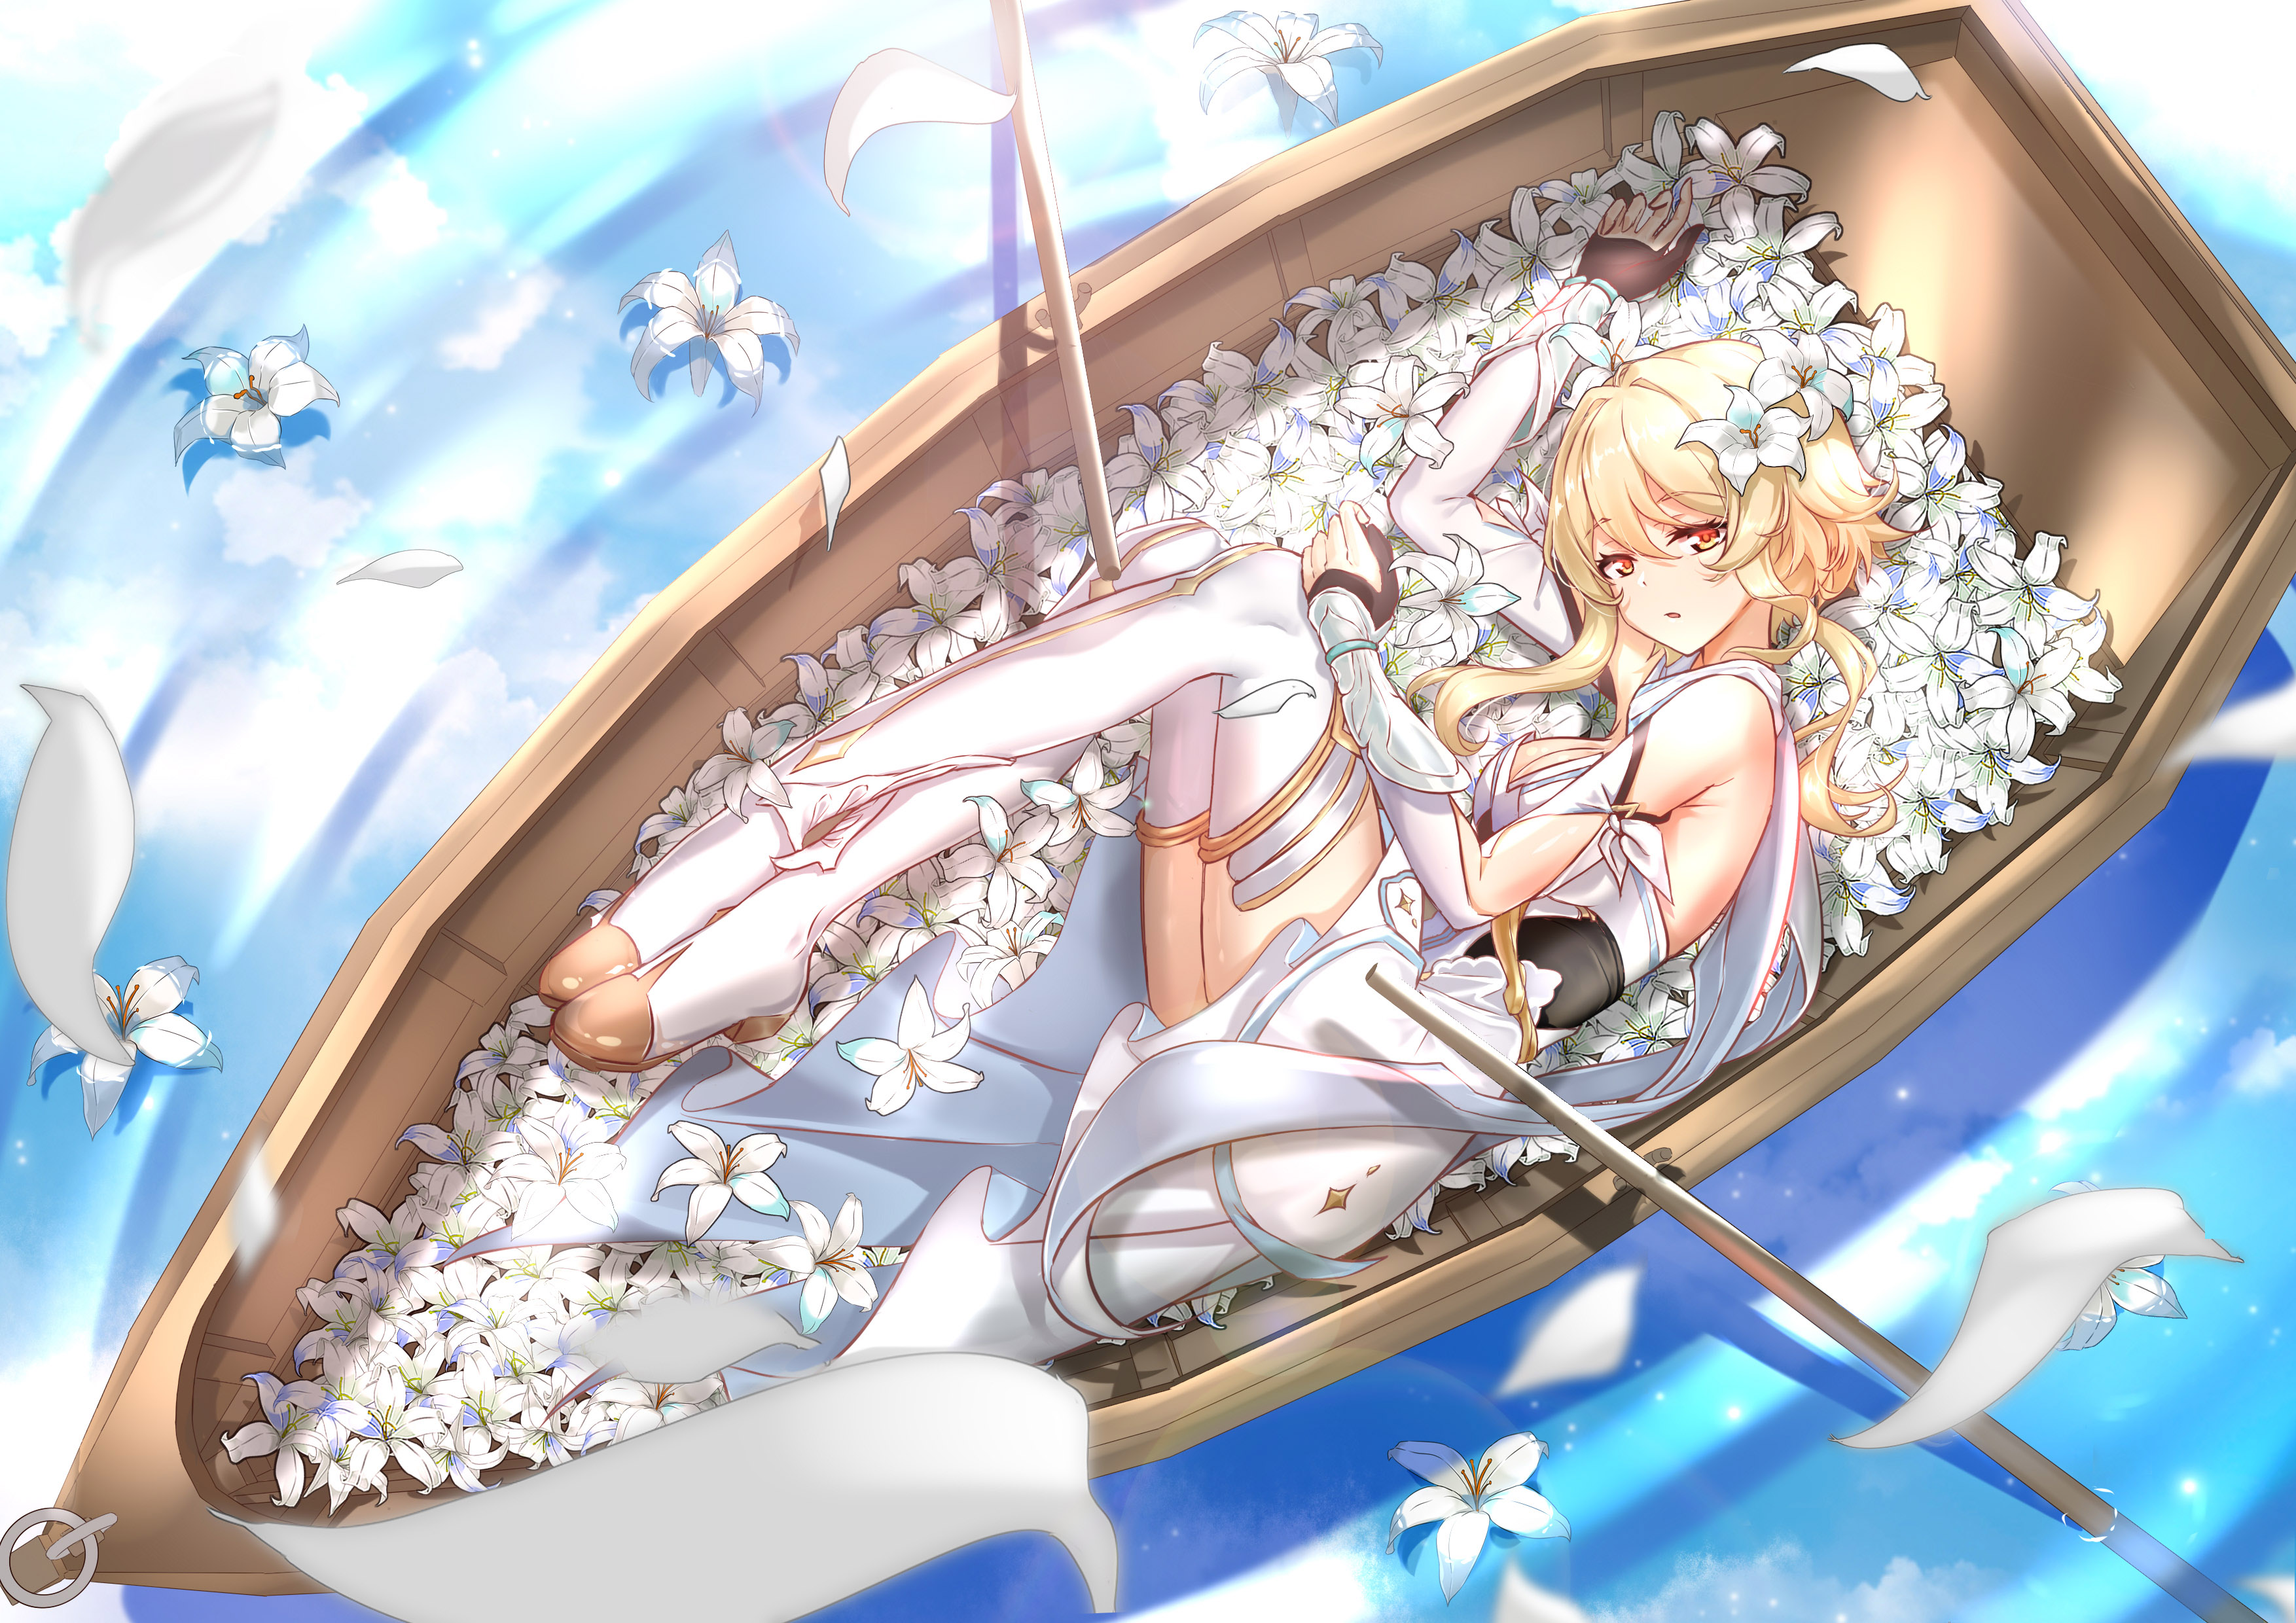 Anime Anime Girls Fantasy Art Fantasy Girl Looking At Viewer Boat Vehicle Petals Blonde Flower In Ha 3508x2480